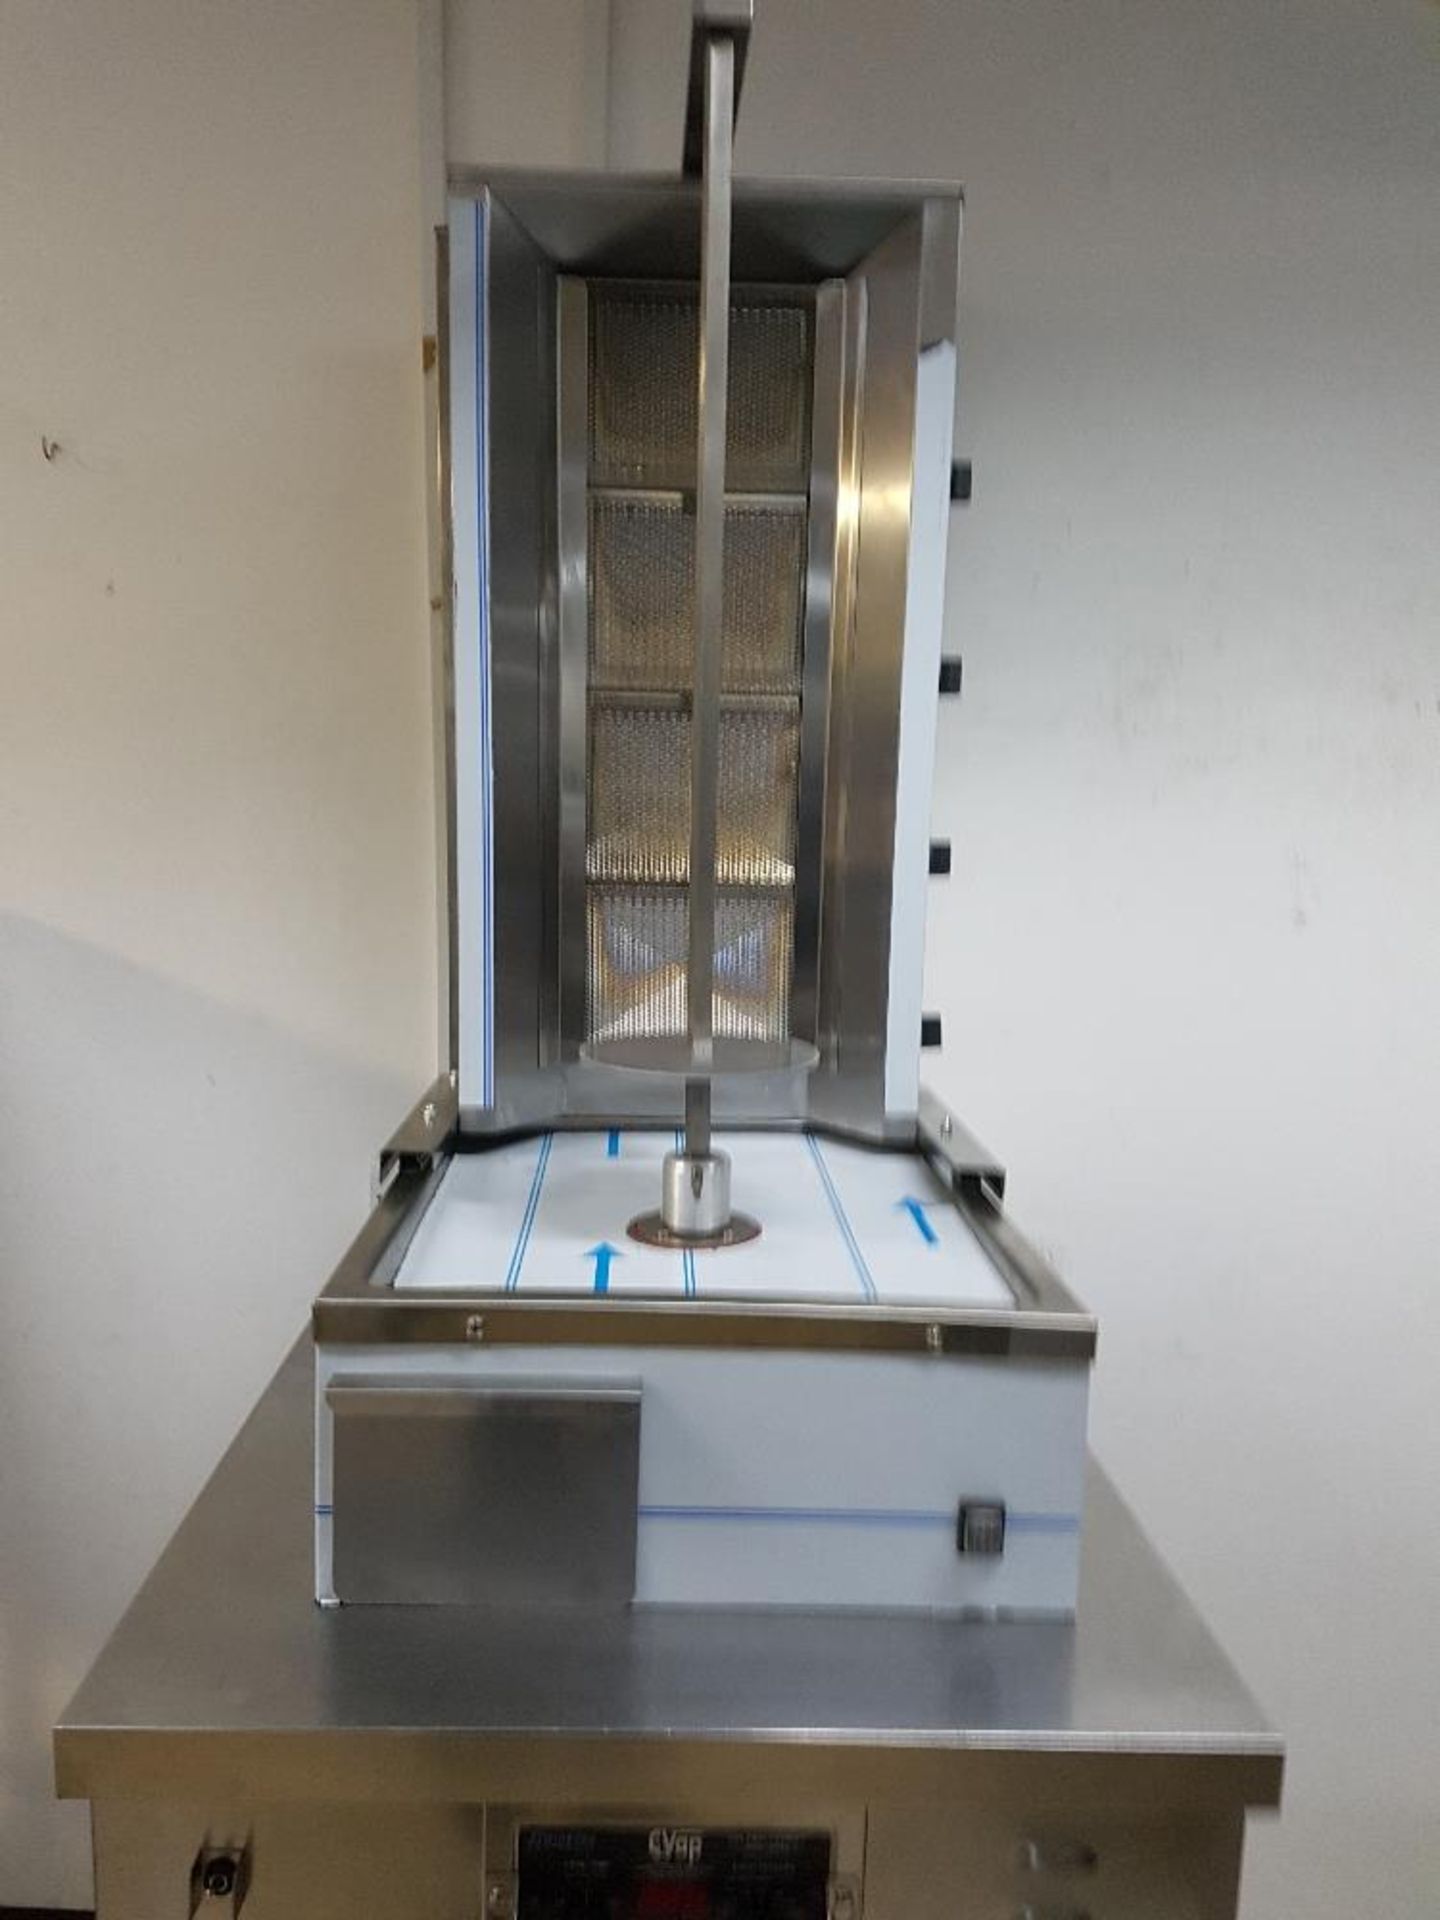 New Table Top Four Burner Kebab Machine – Nat Gas – W500mm x H1100mm x D600mm – Buyer to collect